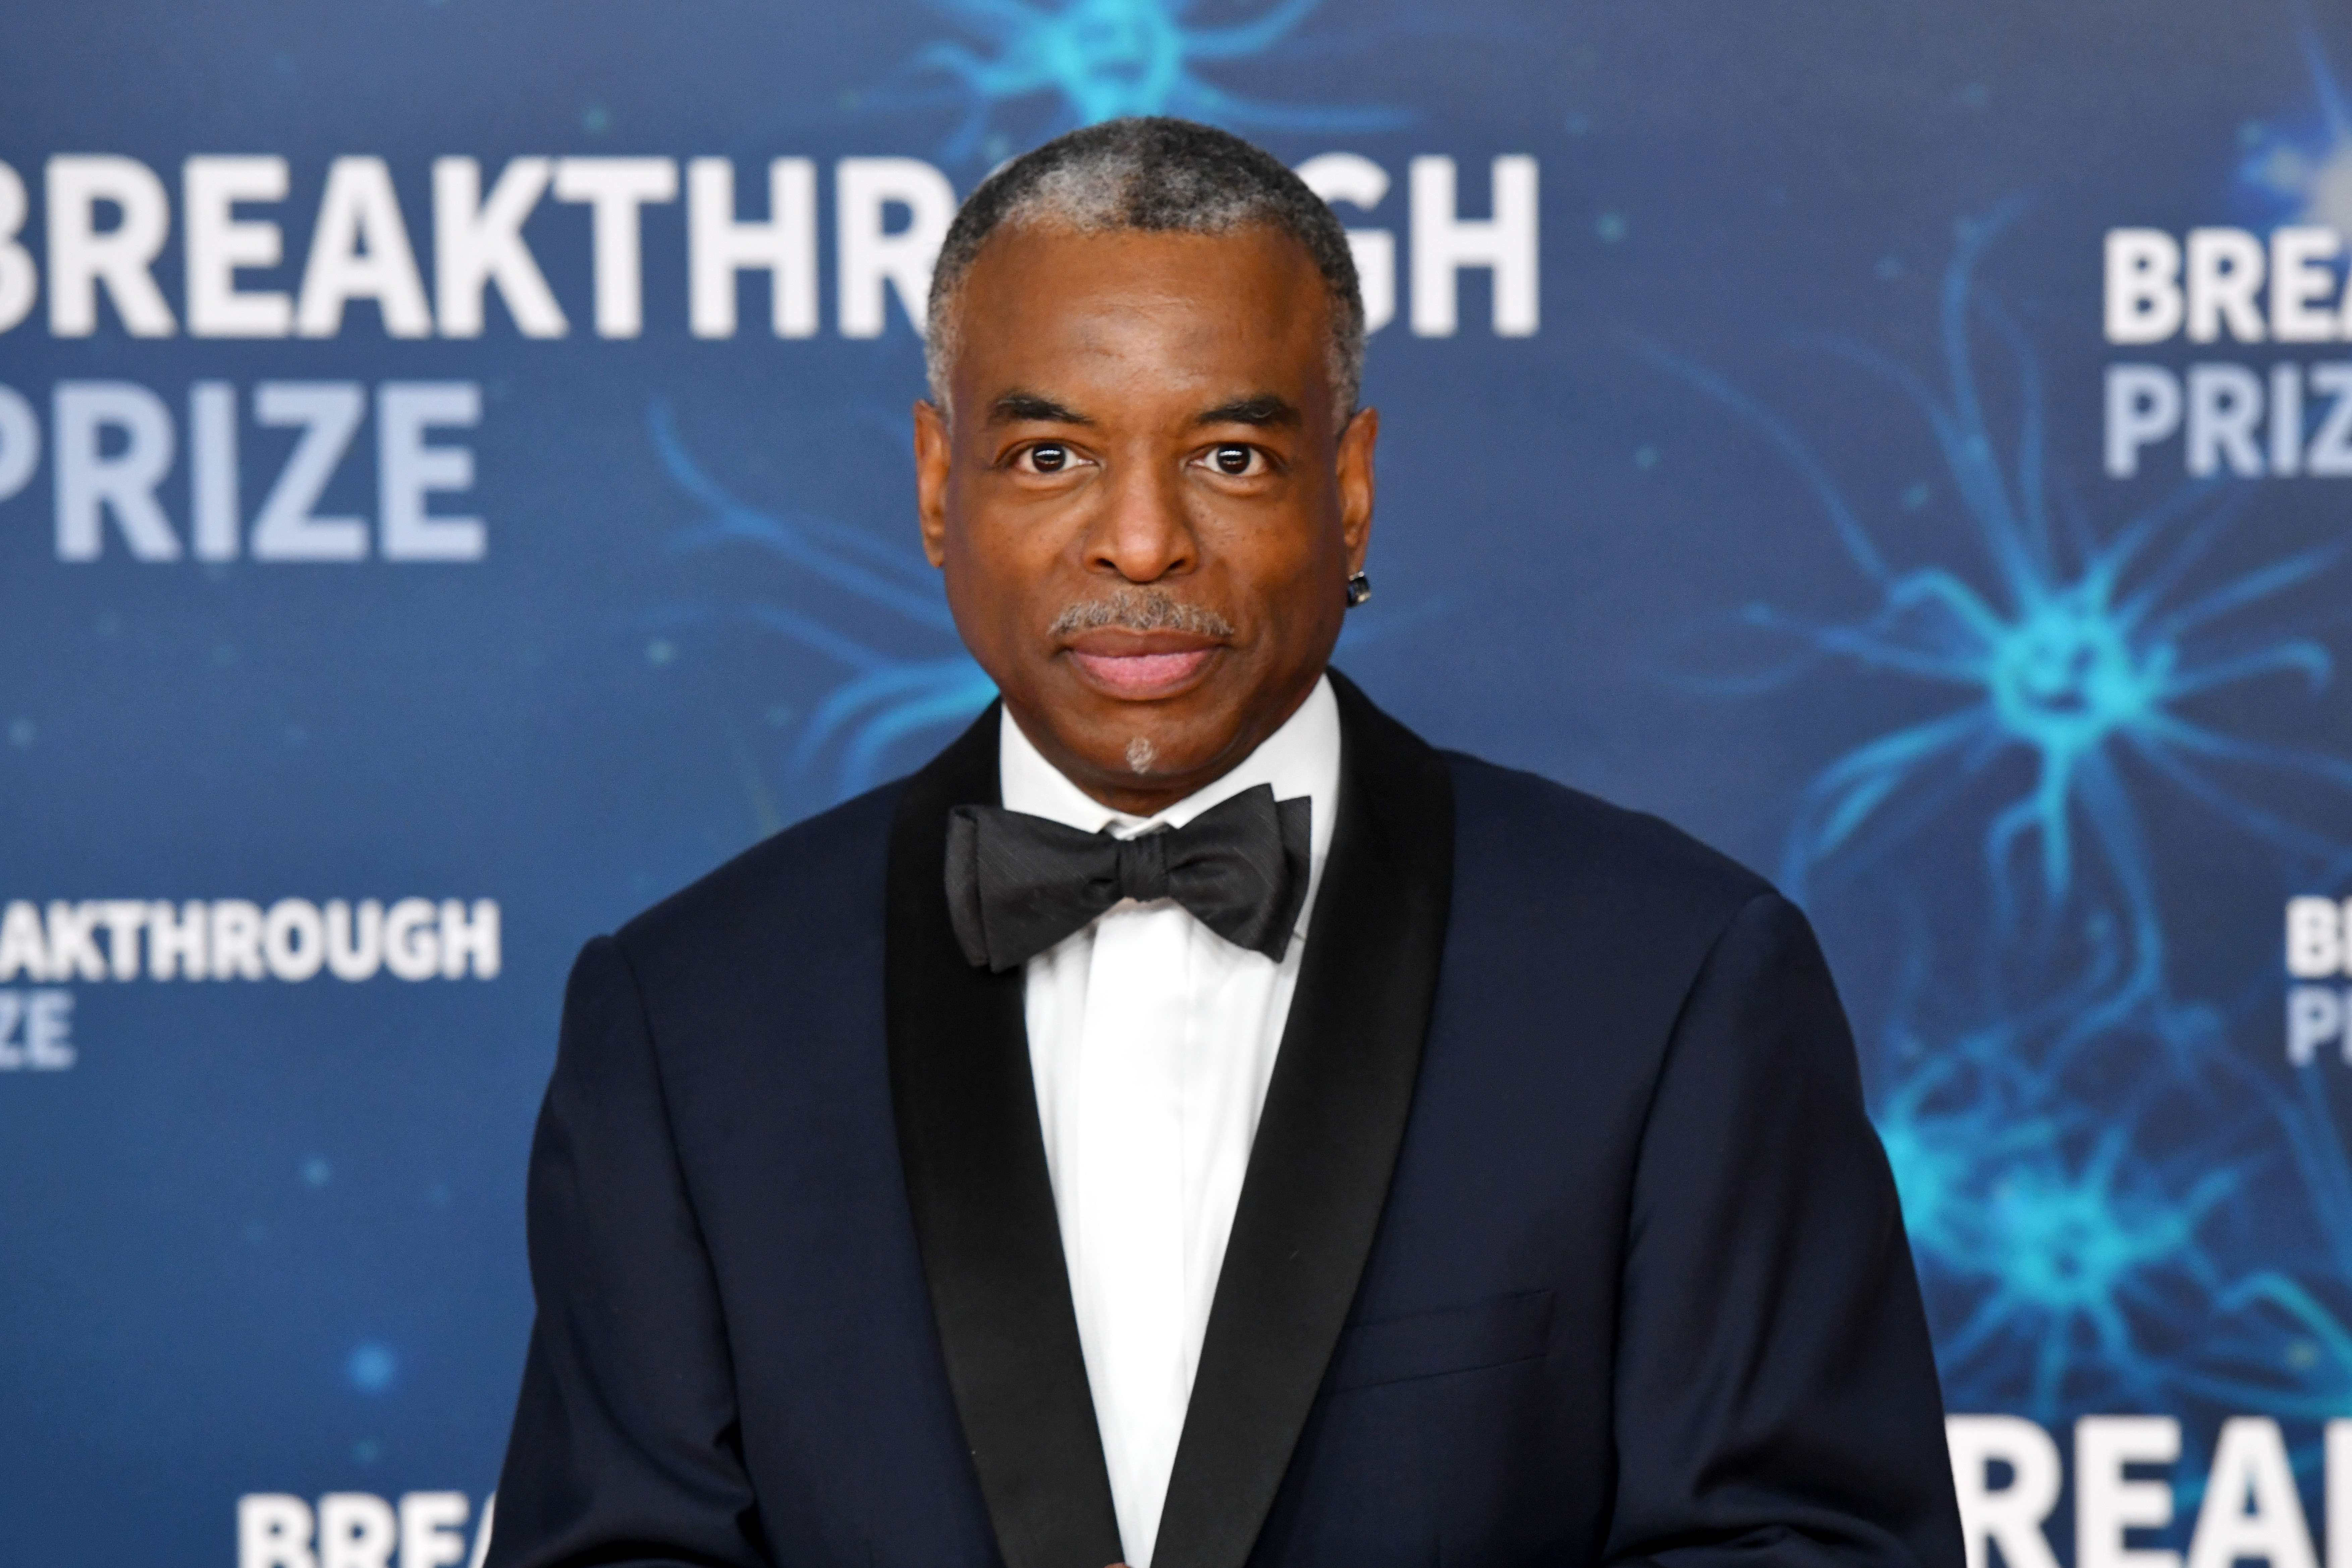 LeVar Burton at the 2020 Breakthrough Prize Awards on November 3, 2019, in Mountain View, California. | Source: Getty Images